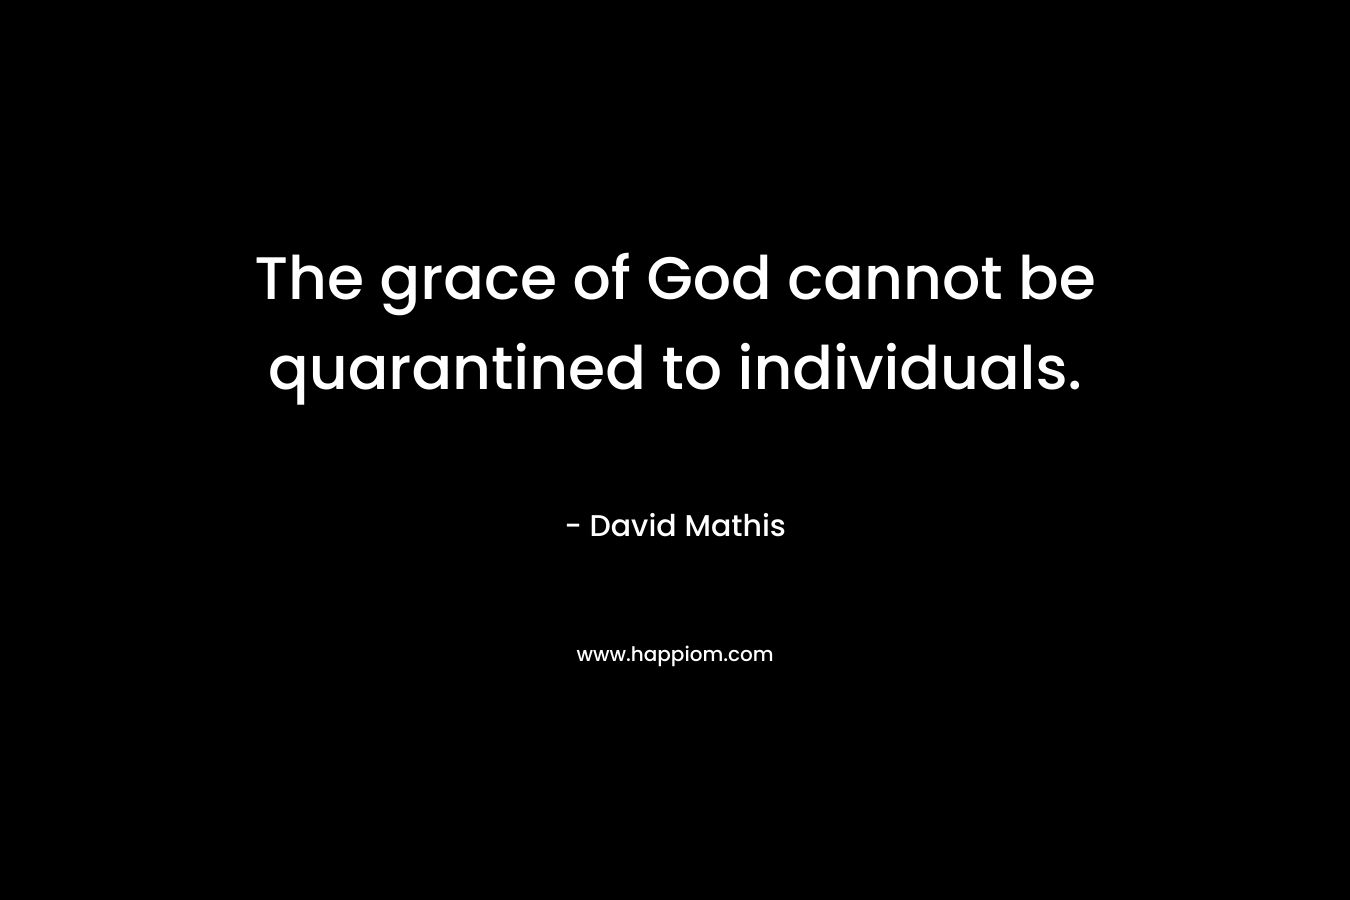 The grace of God cannot be quarantined to individuals. – David Mathis